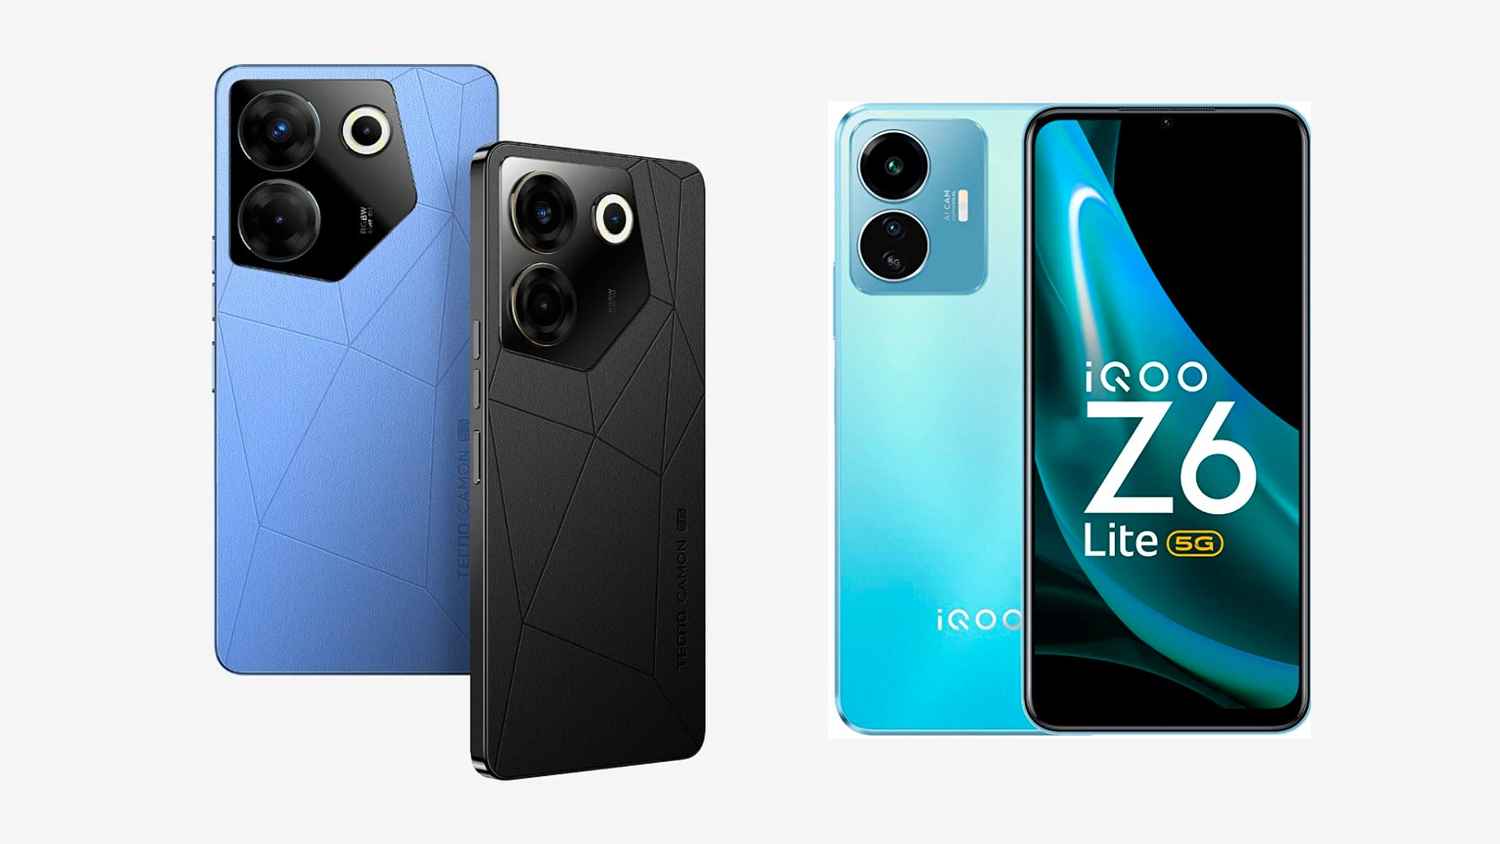 Tecno Camon 20 launched below ₹15,000, with stiff competition from iQOO Z6 Lite